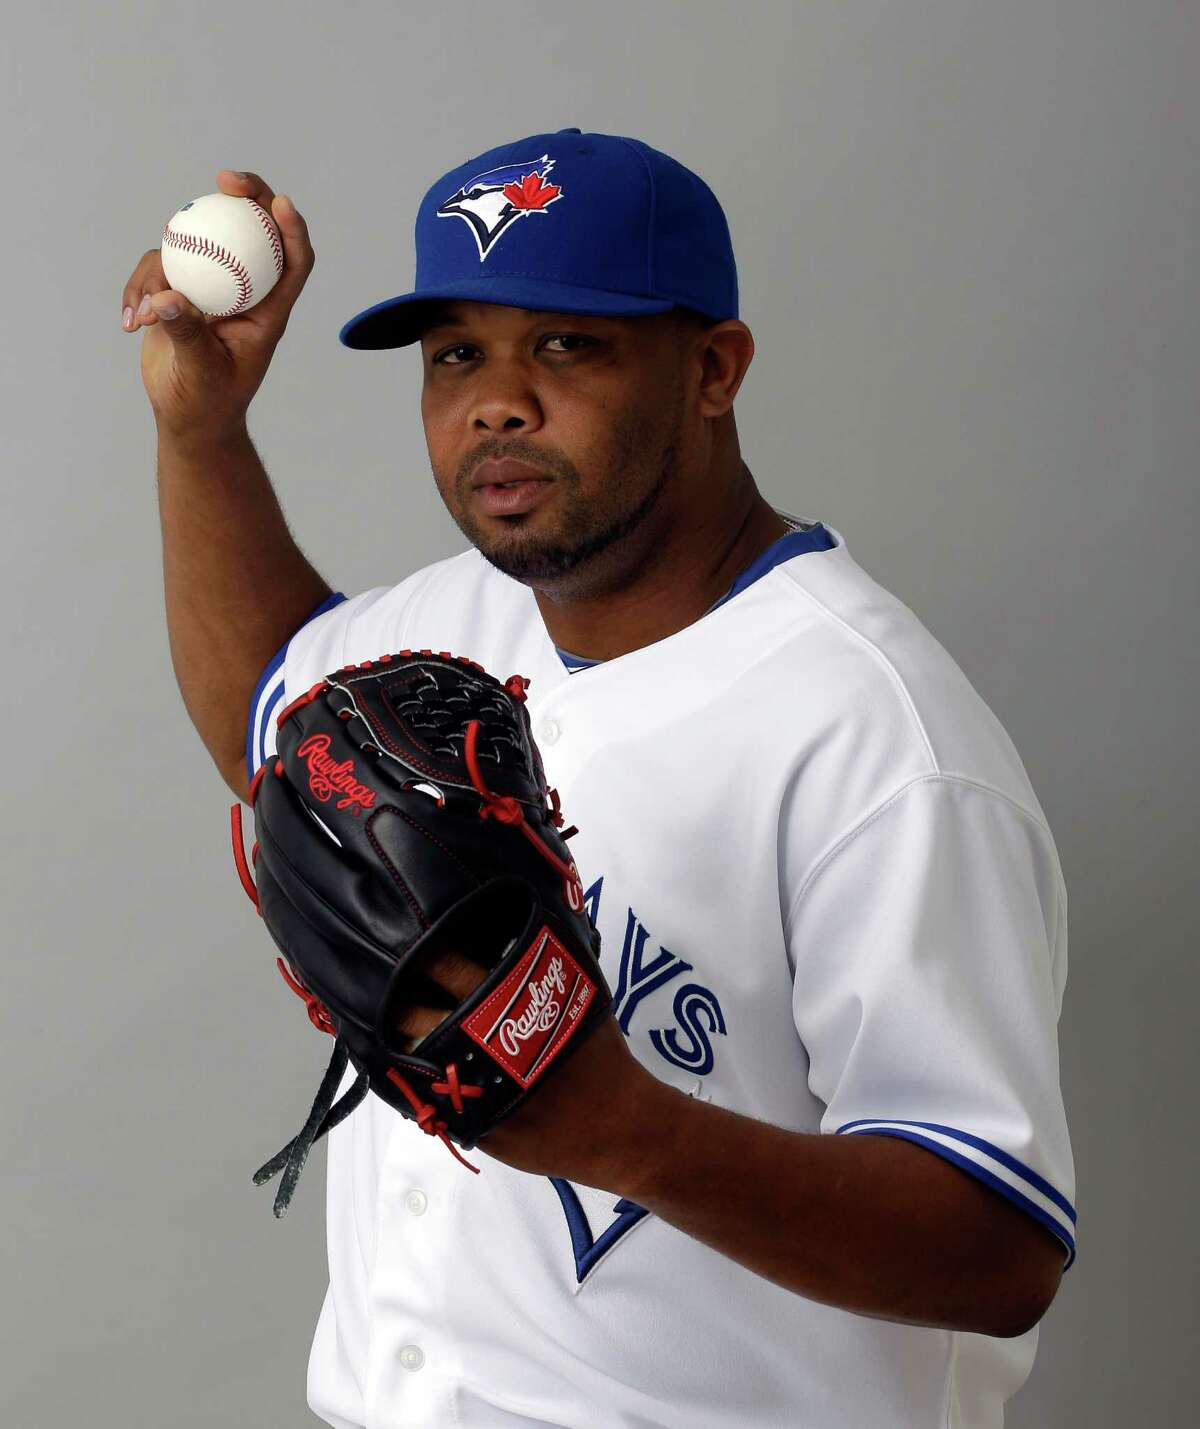 FILE - This 2012 file photo shows Francisco Cordero of the Toronto Blue Jays baseball team. The Houston Astros have acquired closer Cordero and outfielder Ben Francisco as part of a 10-player trade with Toronto. (AP Photo/Matt Slocum)